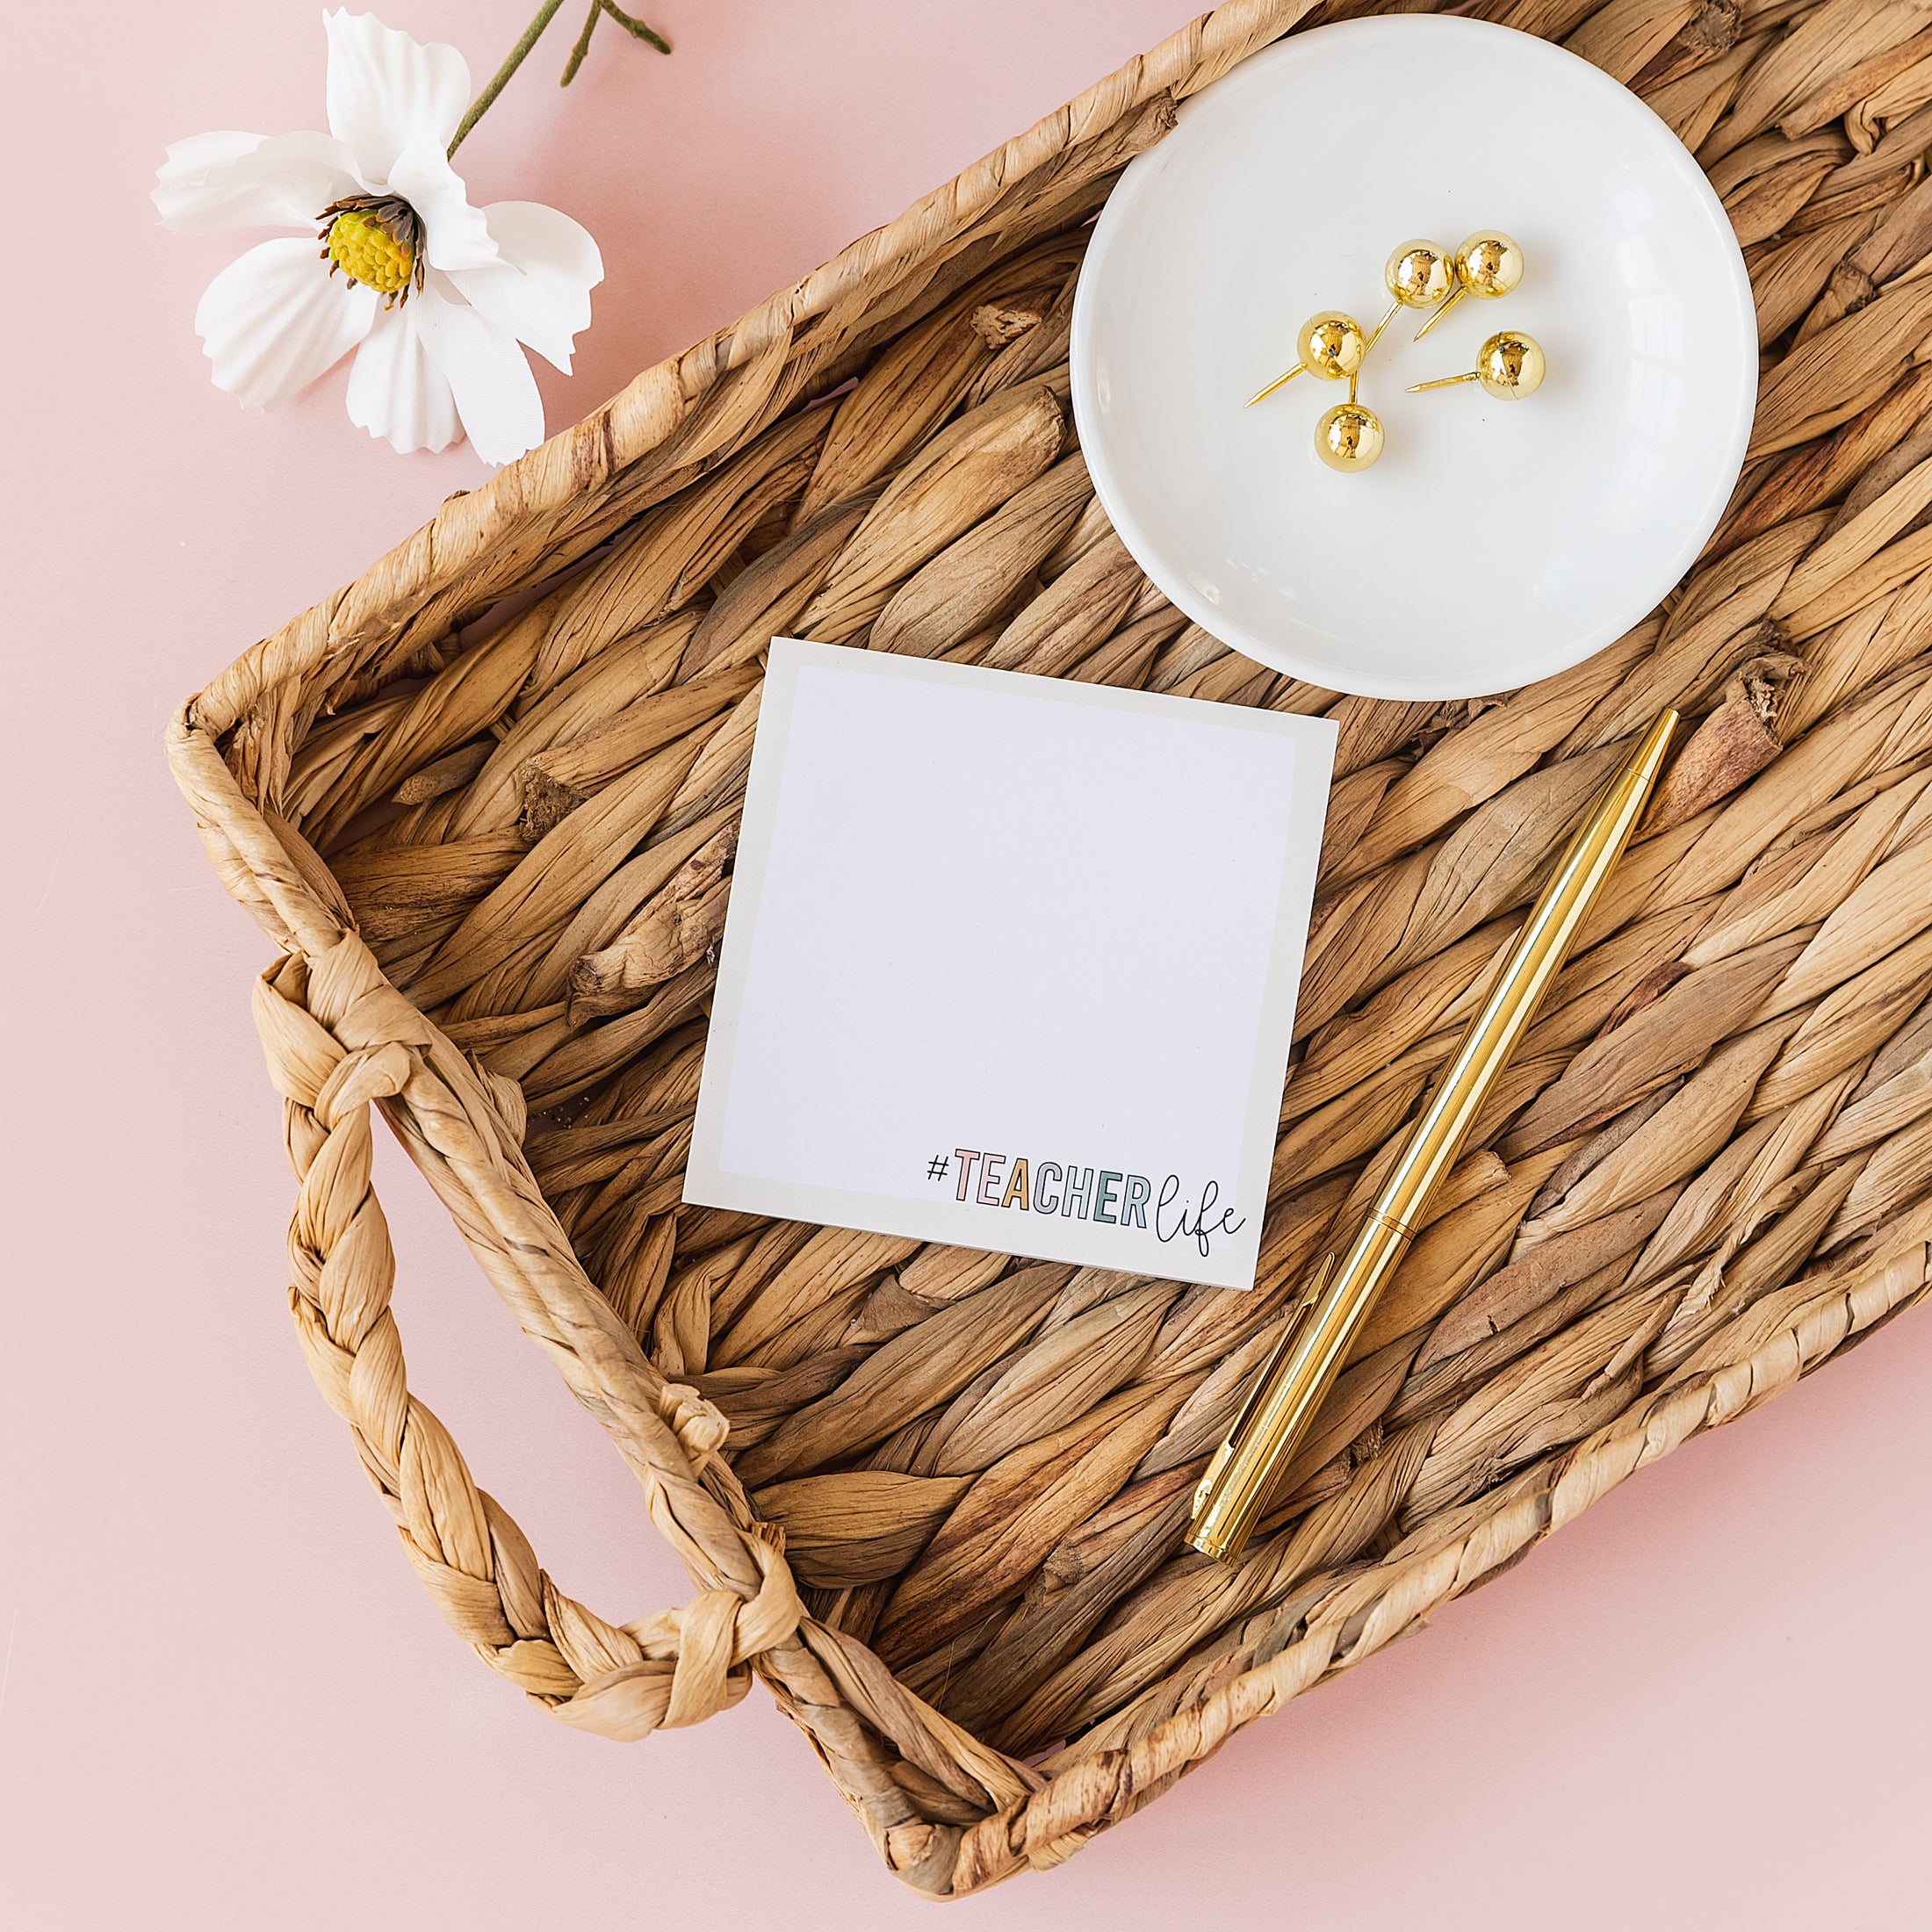 a basket with a notepad, pen, and flower on it